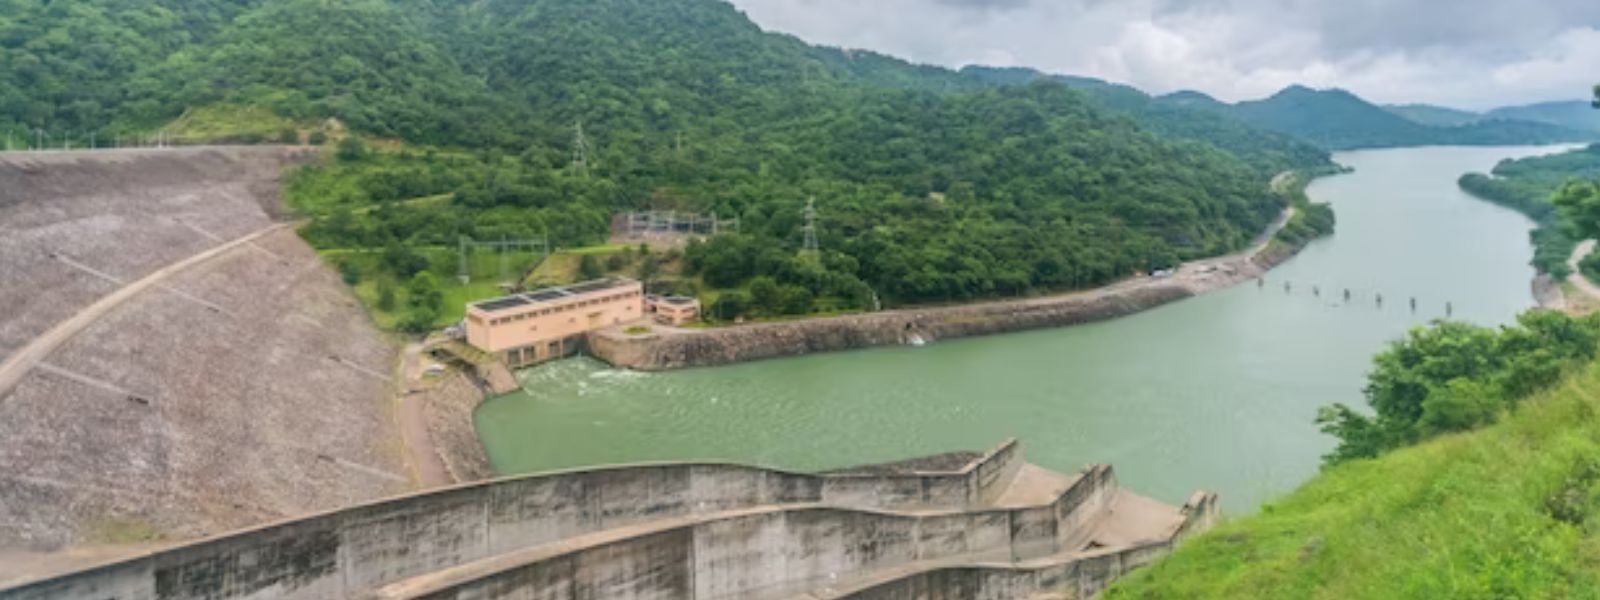 Water levels of reservoirs still low